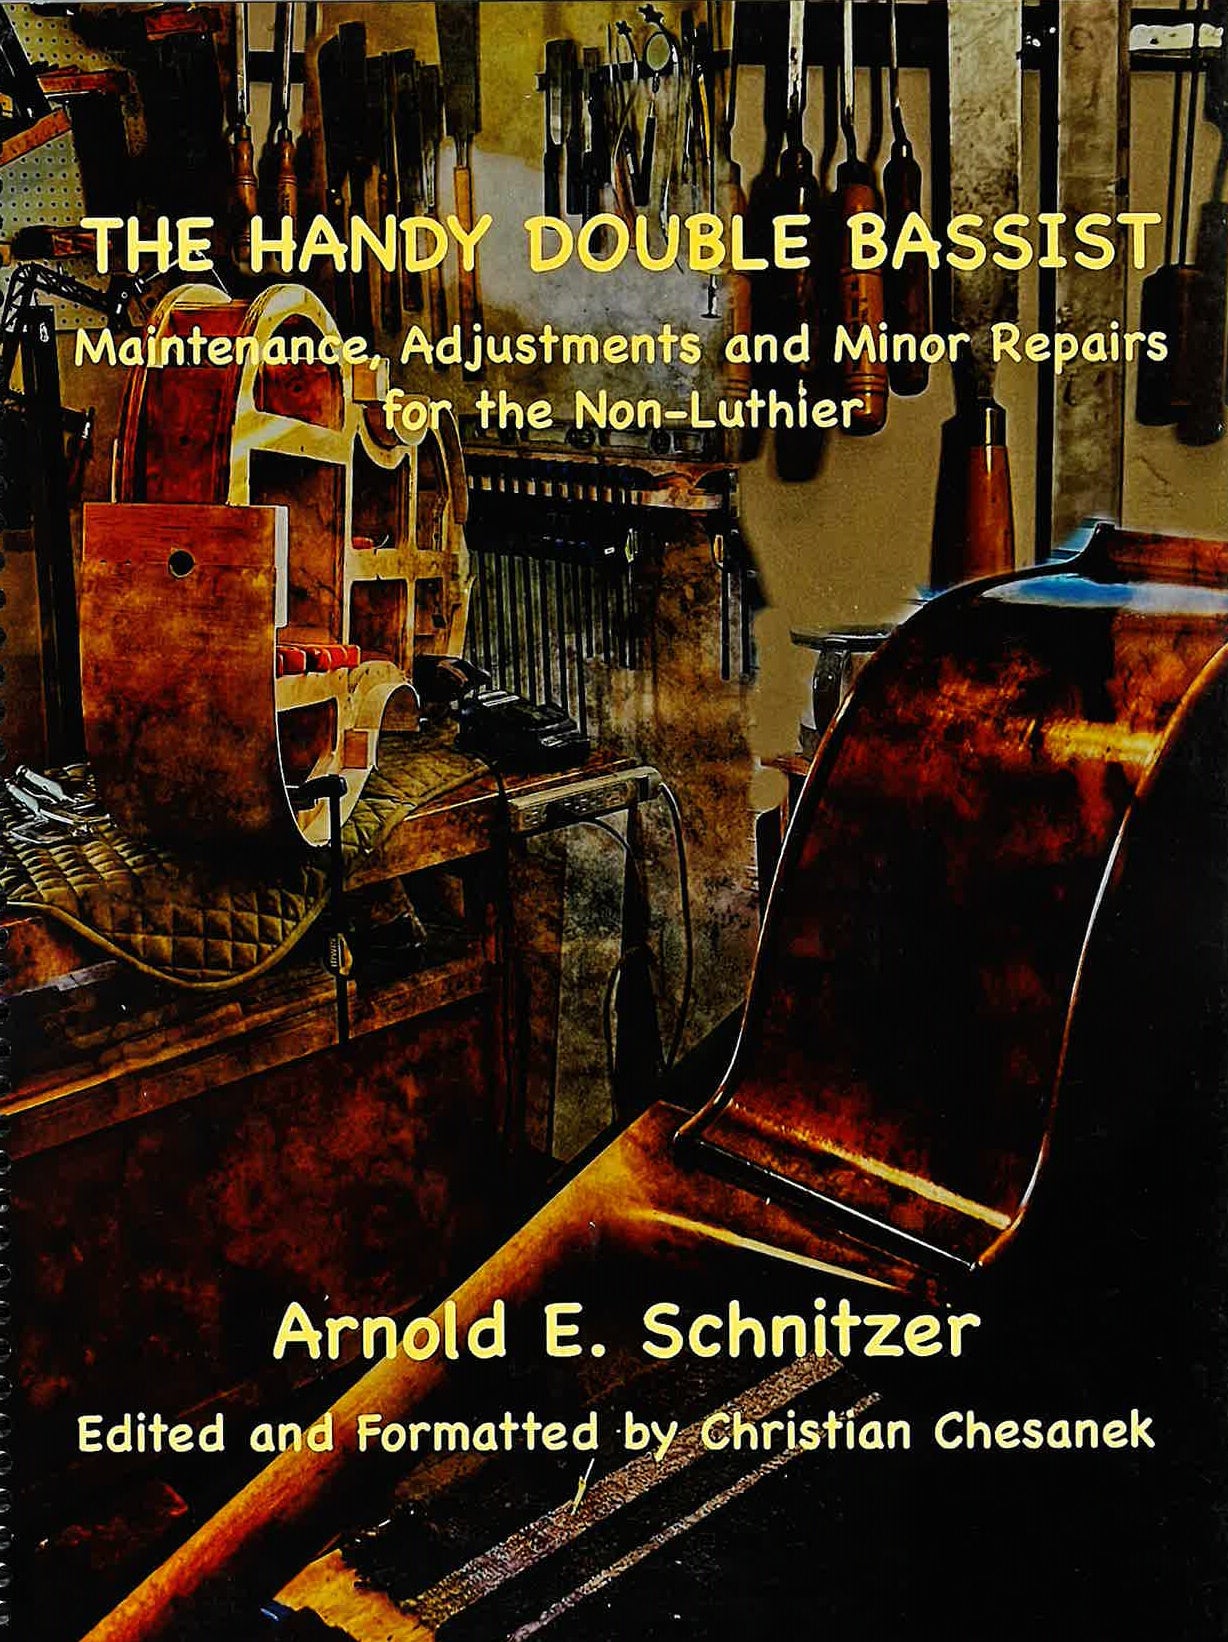 Schnitzer: The Handy Double Bassist: Maintenance, Adjustments and Minor Repairs for the Non-Luthier